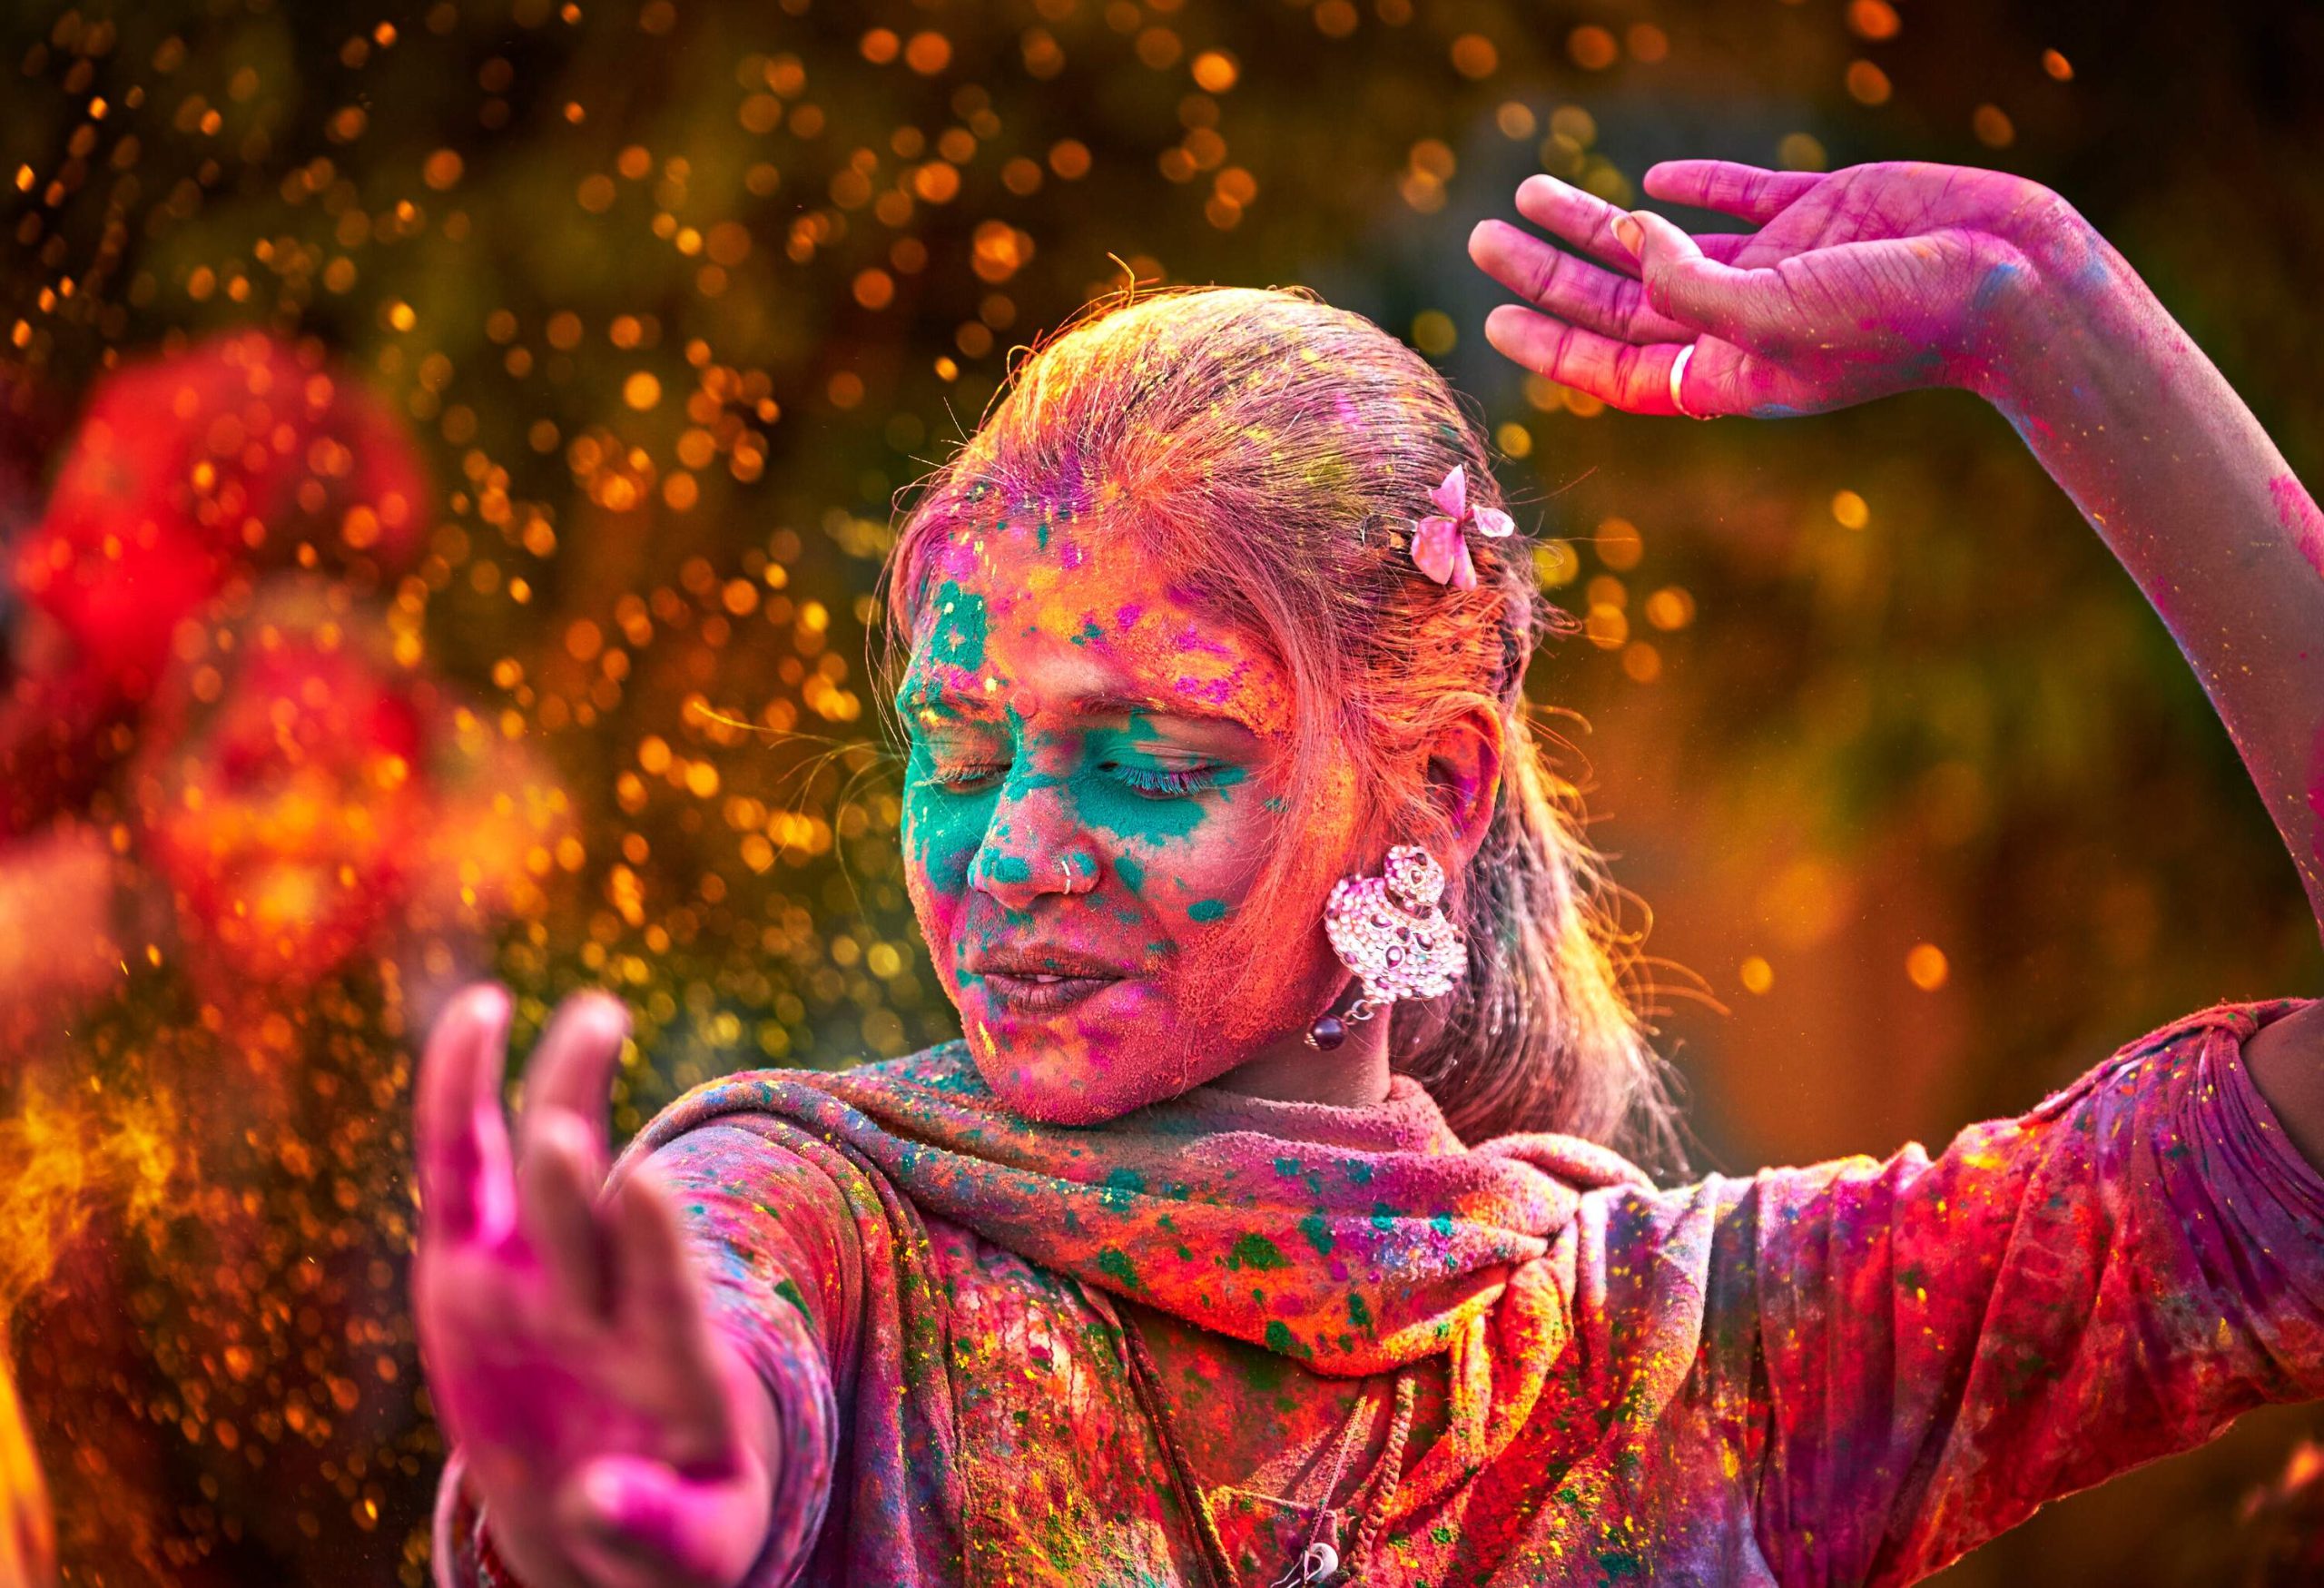 A woman with big earrings dancing after being thrown with colourful dye powder during the Holi festival.